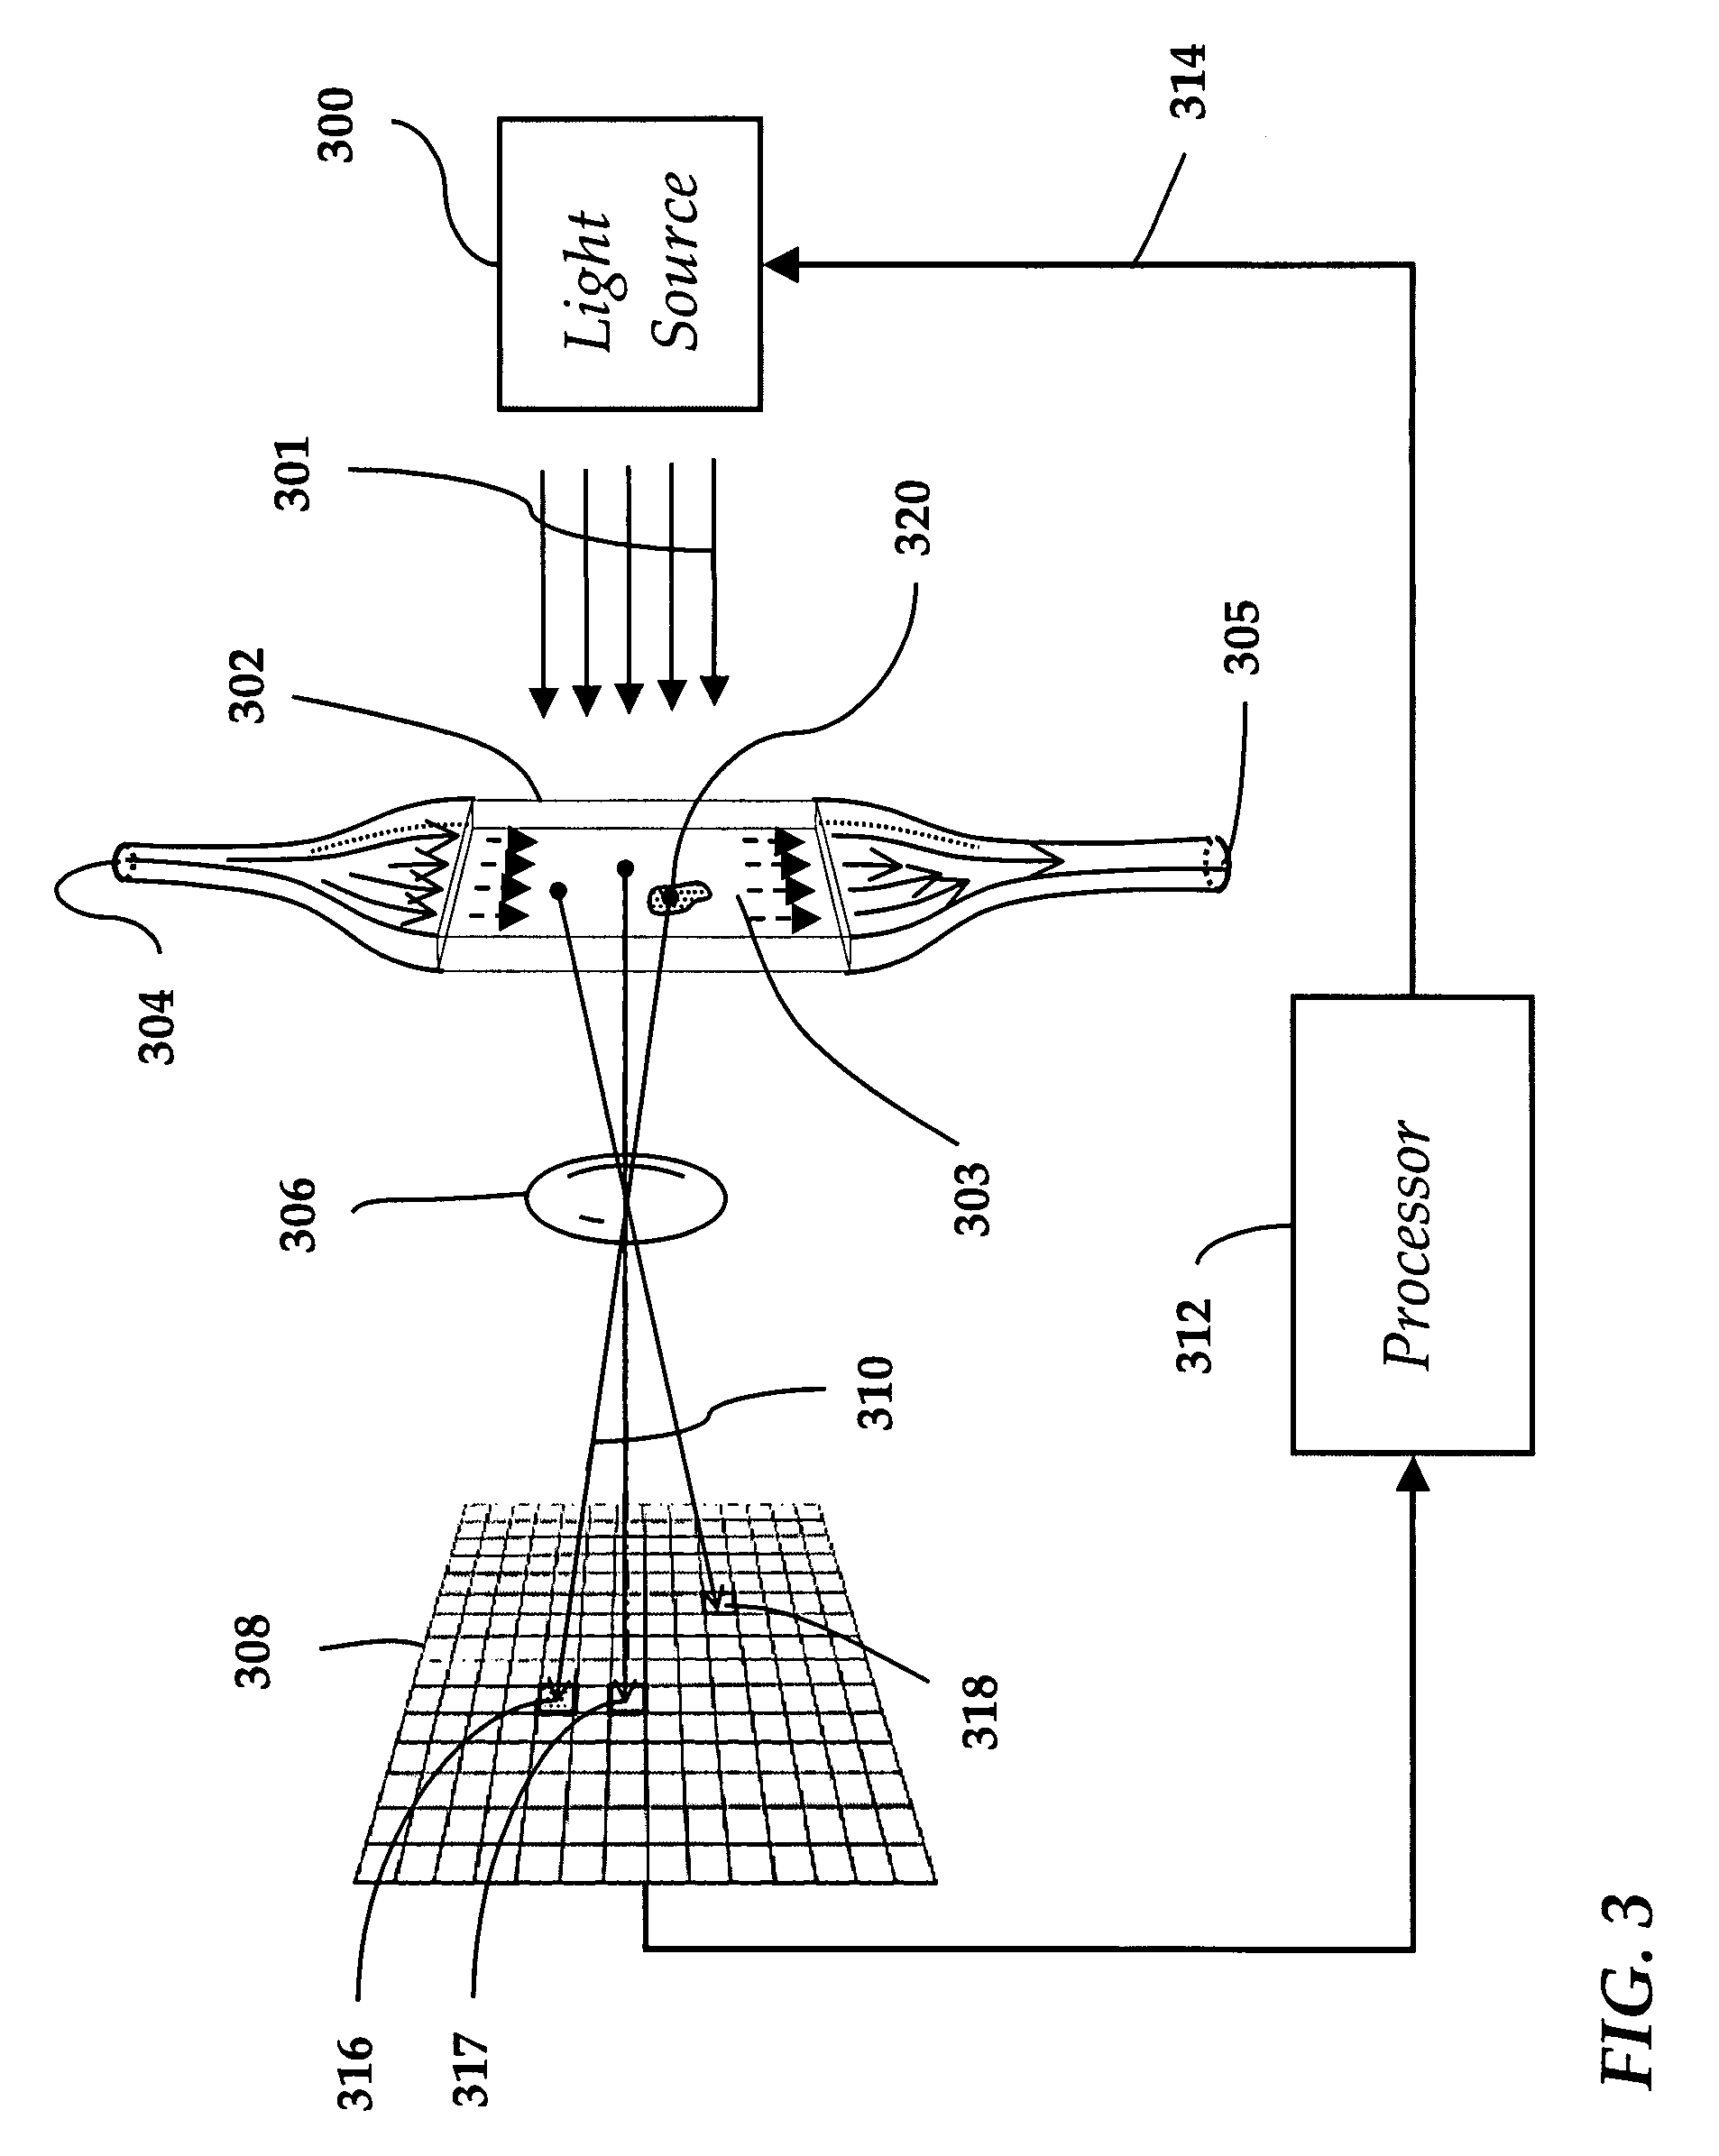 Method and apparatus for analyzing particles in a fluid